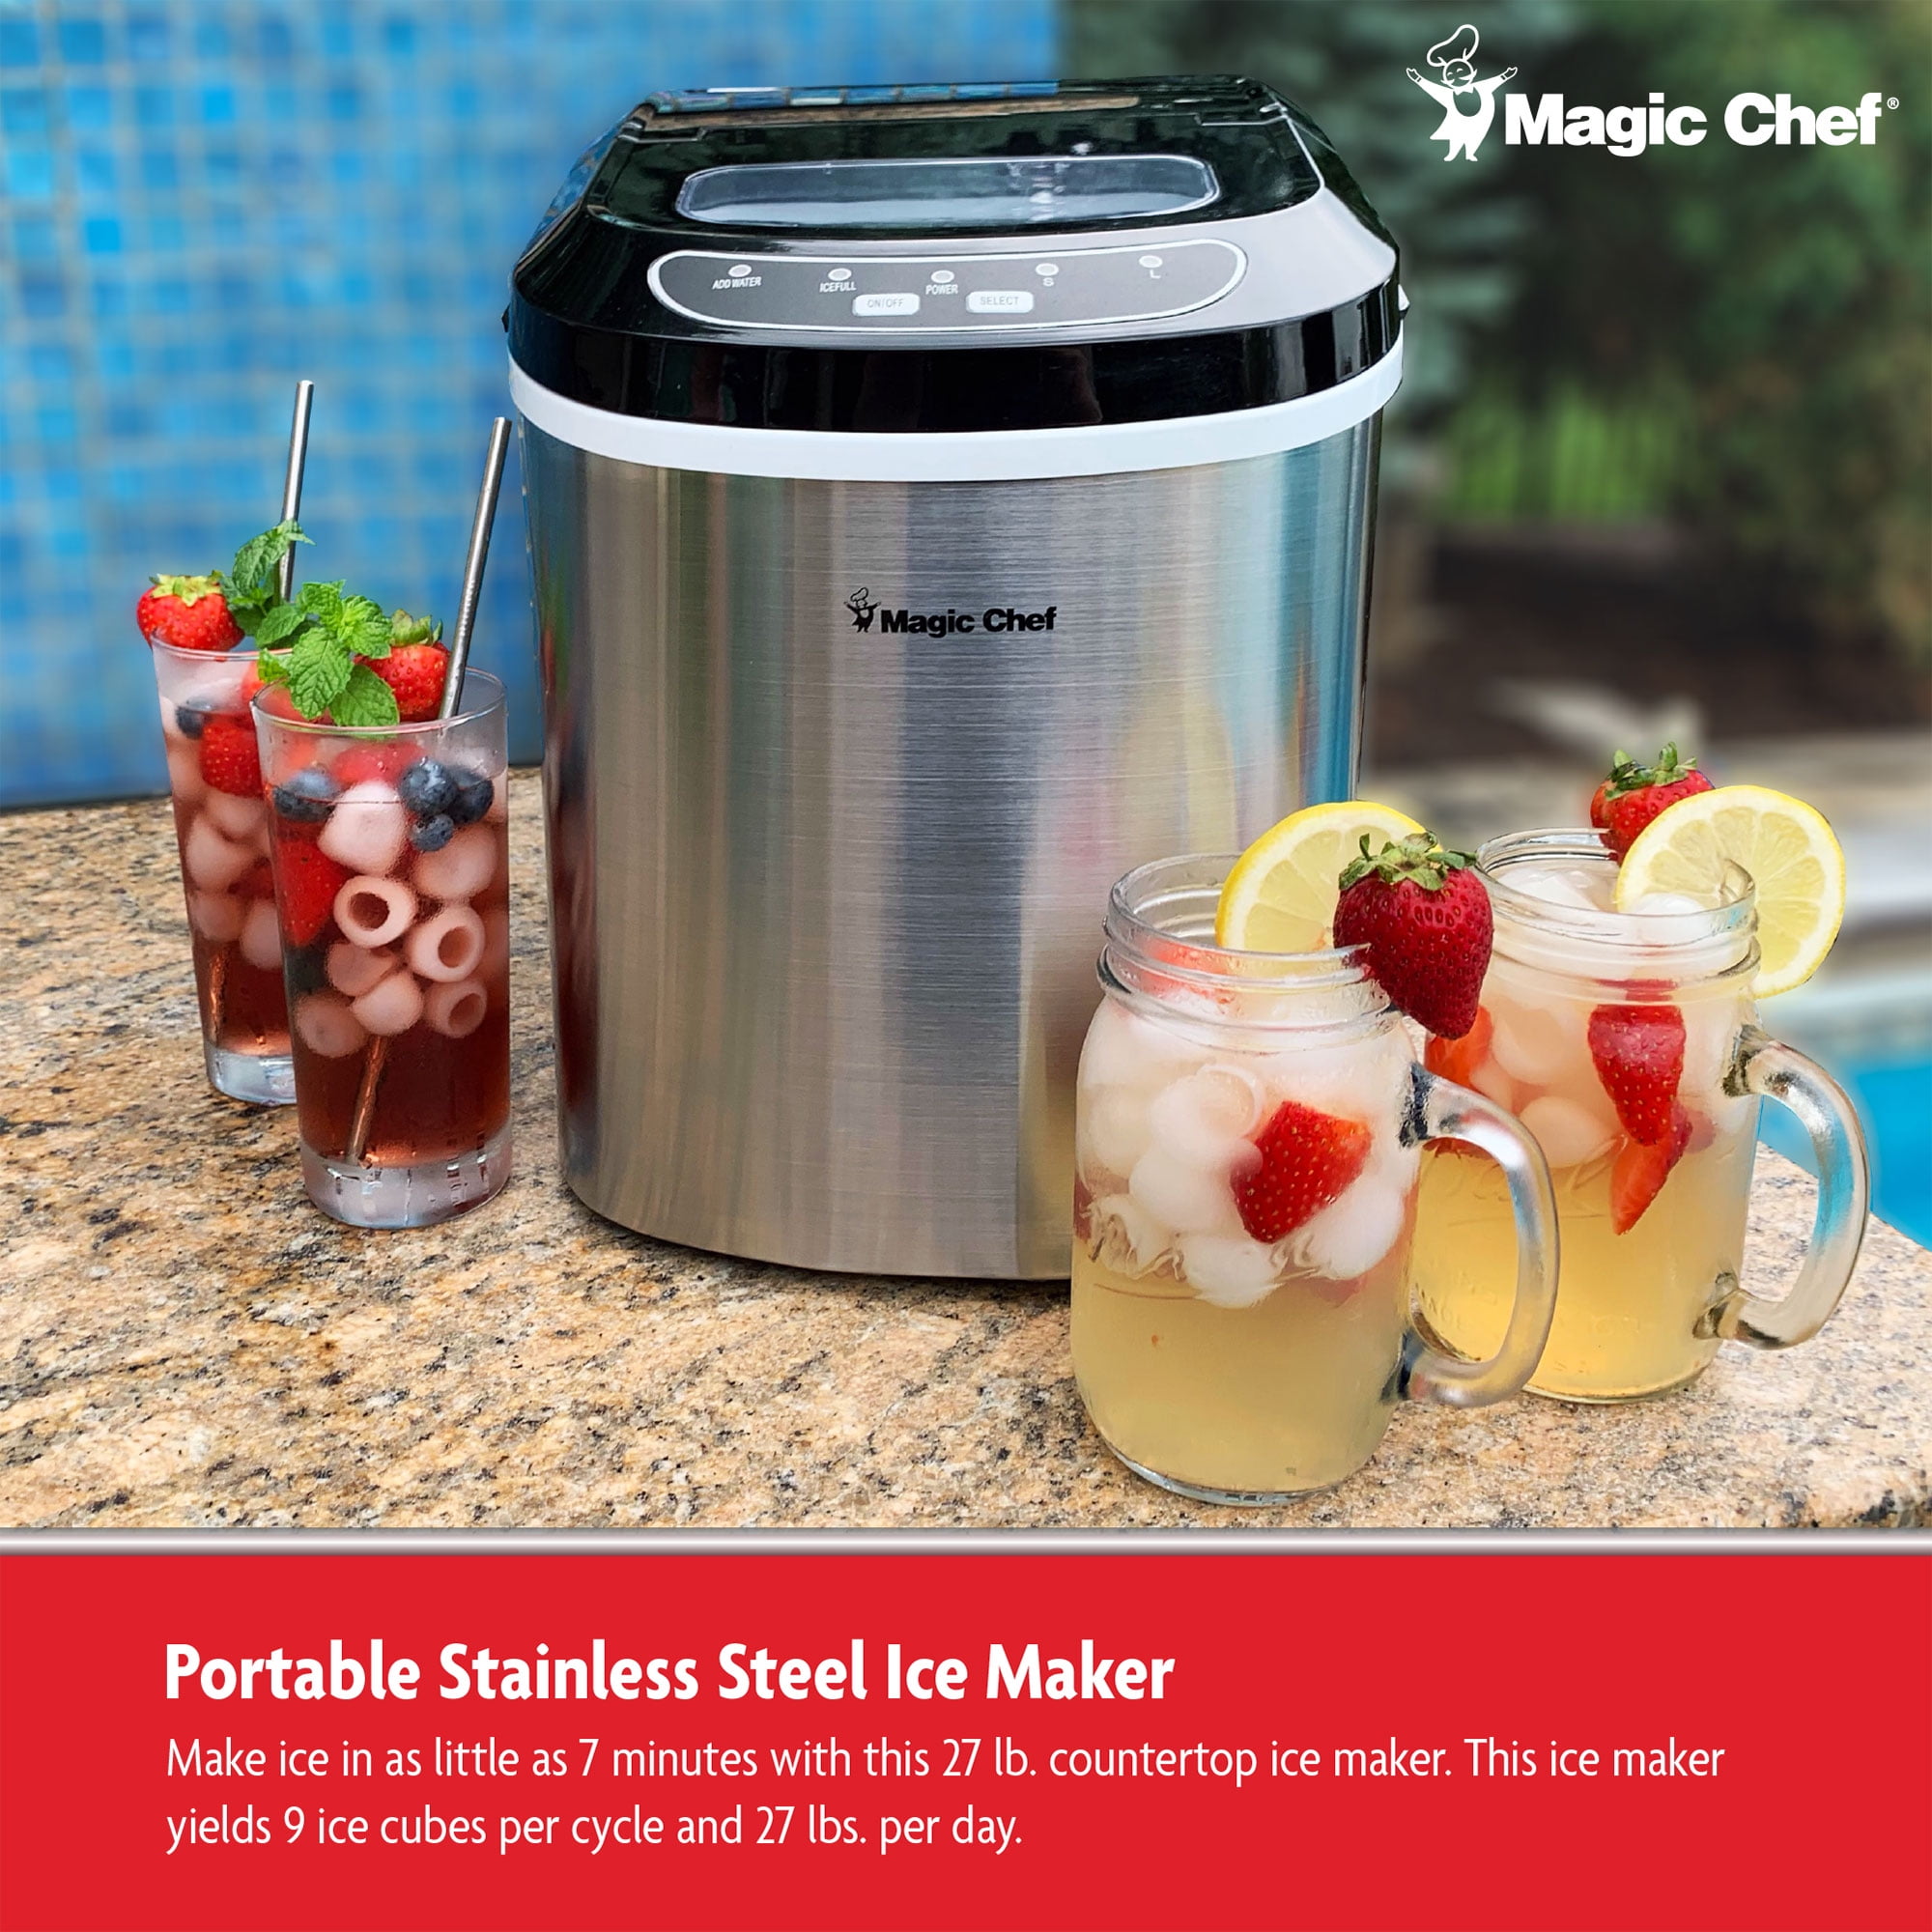 Magic Chef 27lbs Portable Countertop Ice Maker Stainless Steel 696601824345